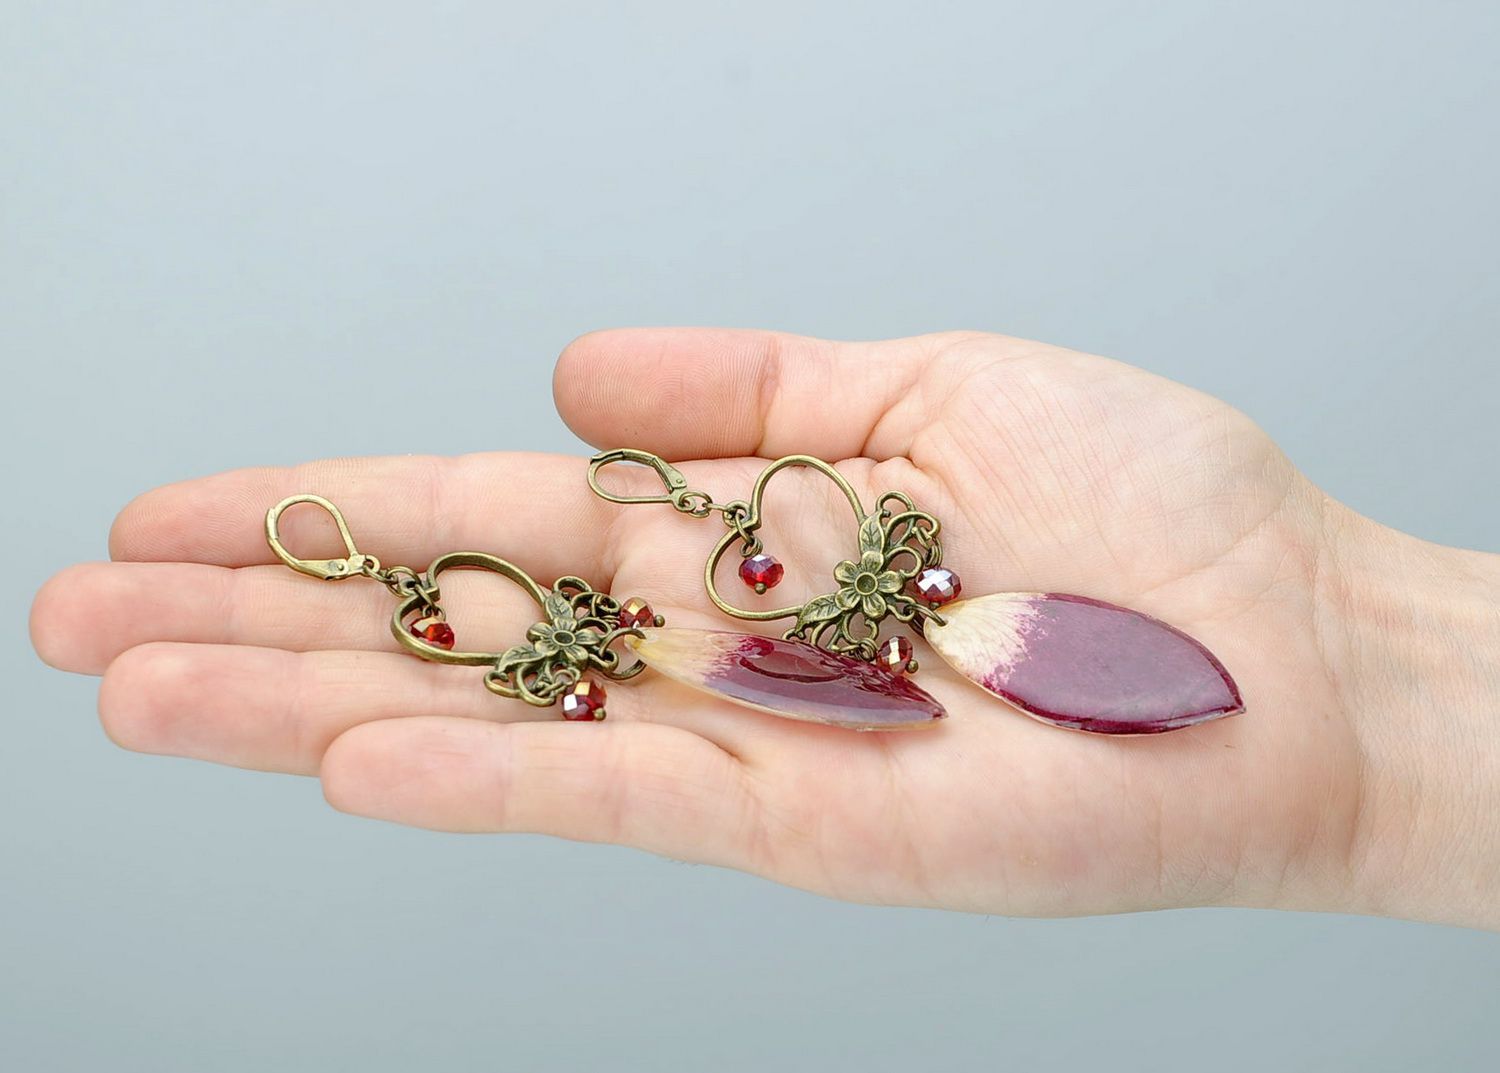 Earrings made from rose petals and crystal beads photo 5